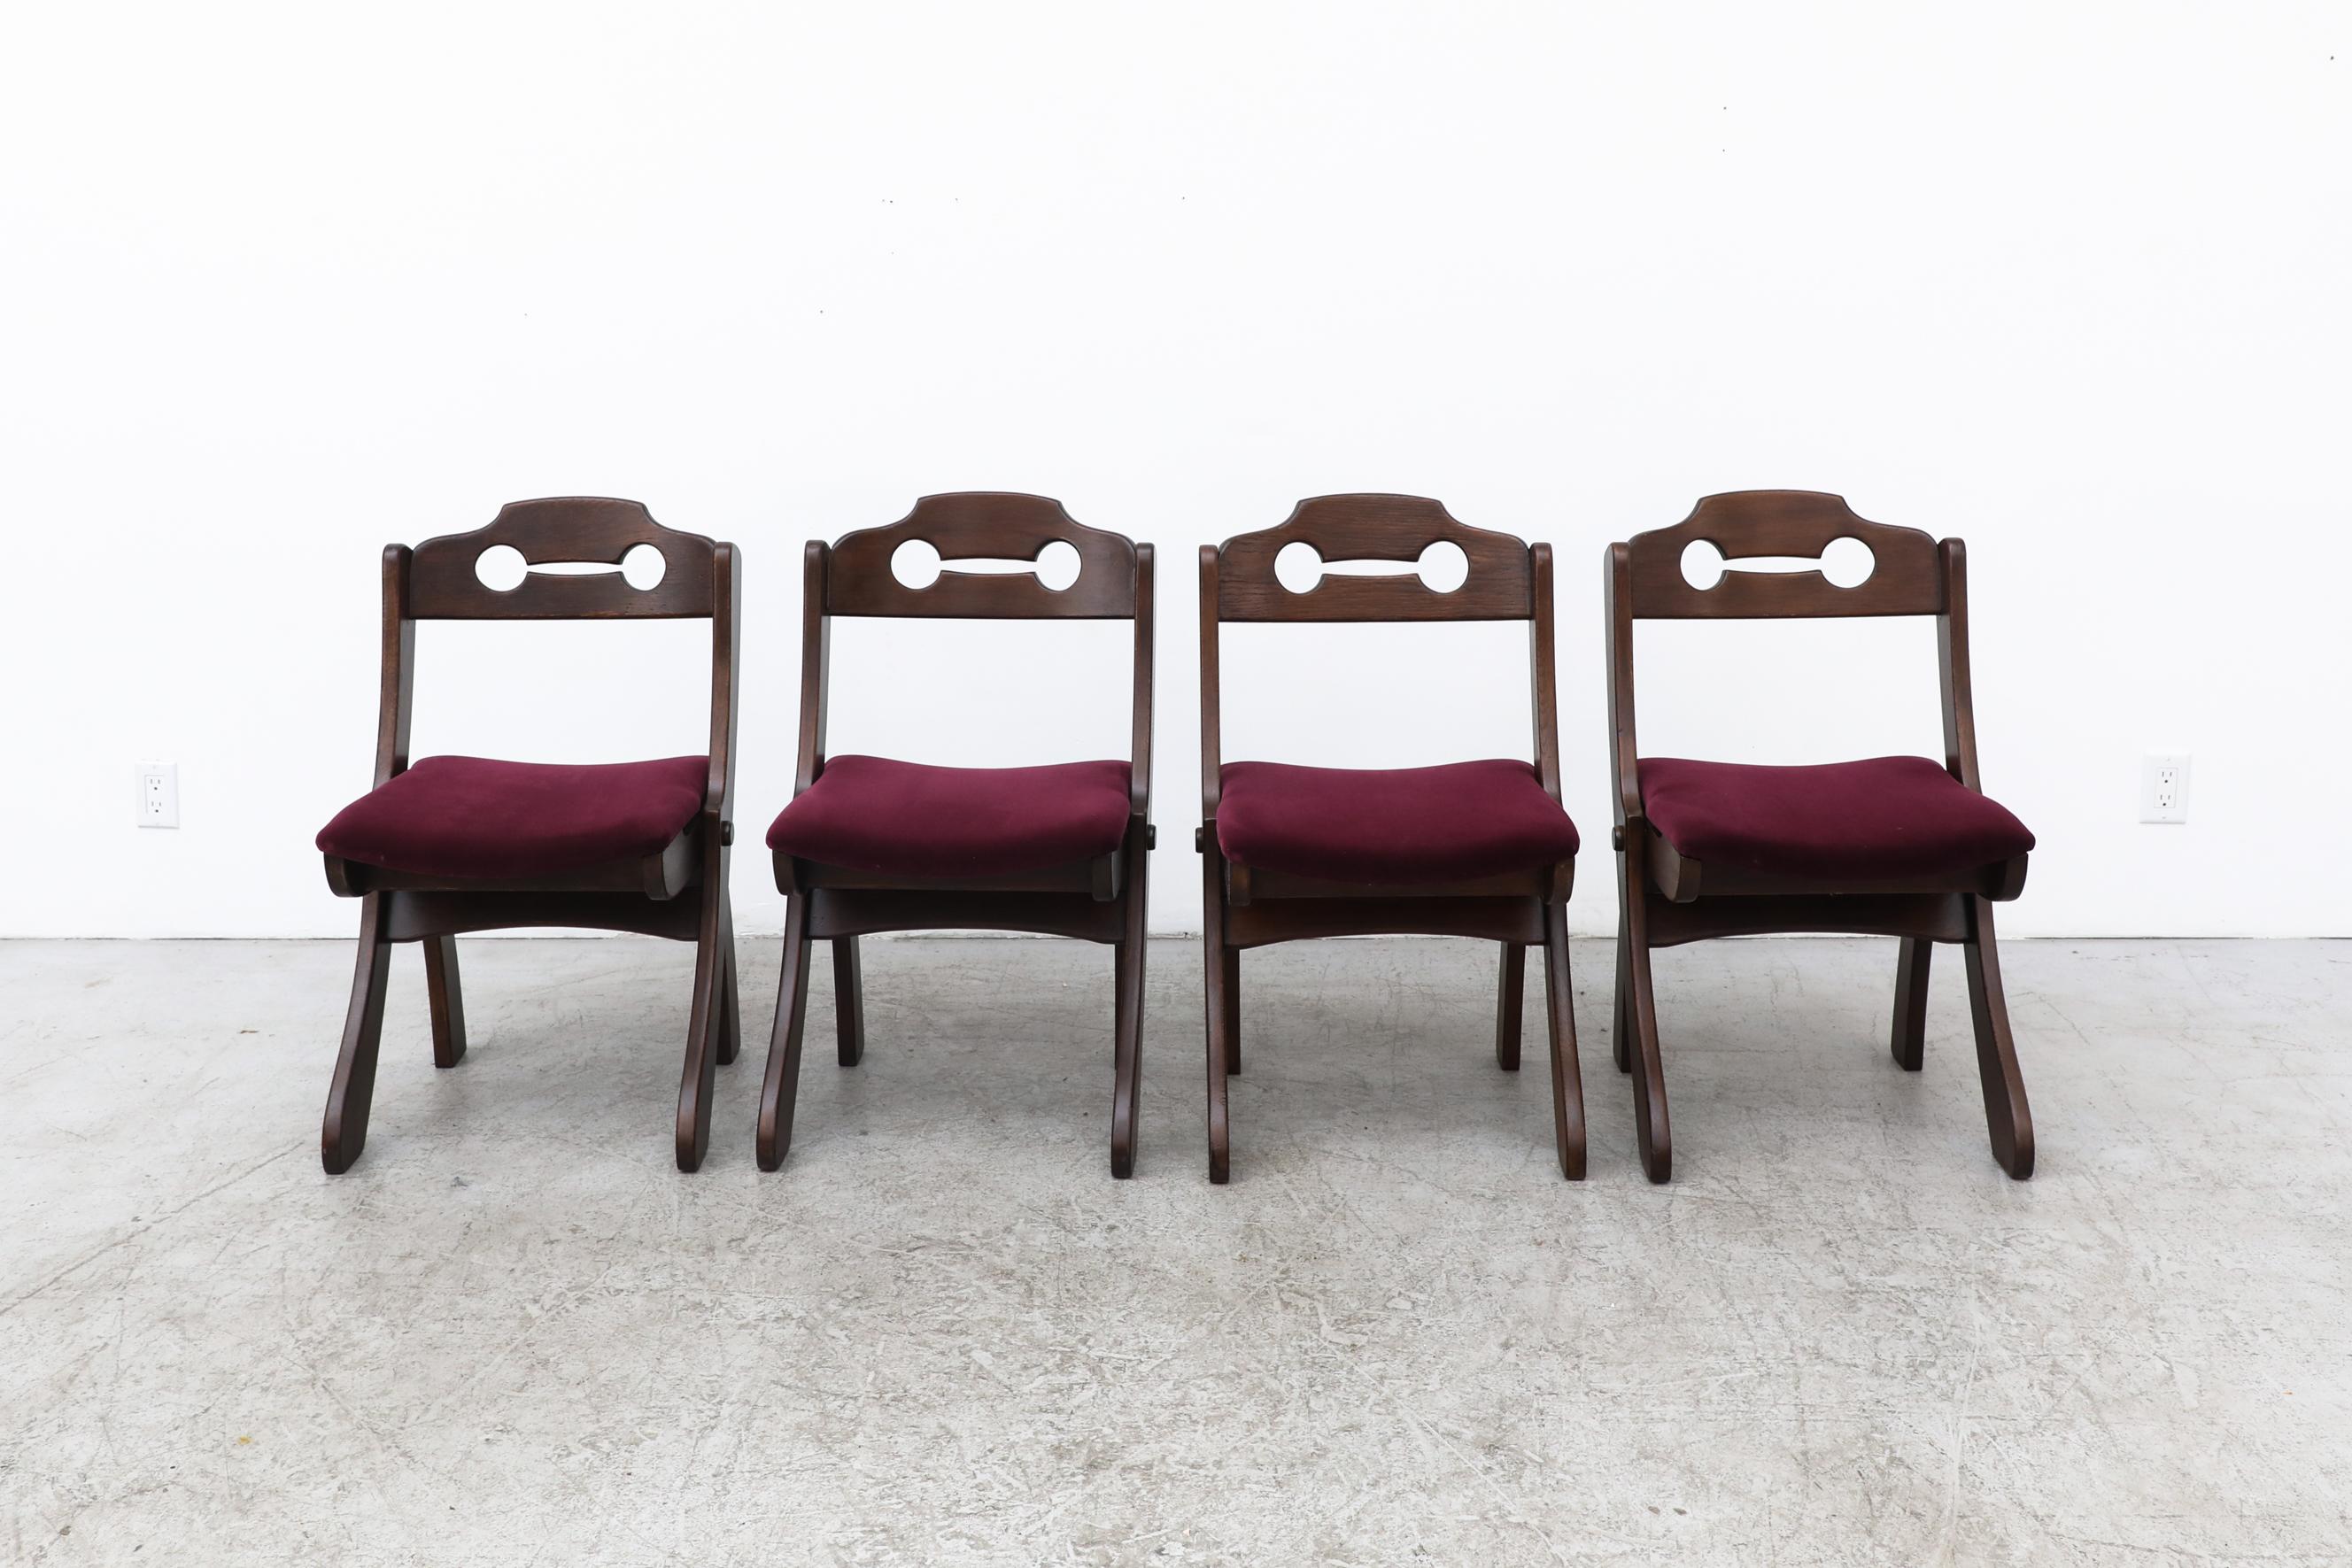 Belgian Set of 4 Dark Stained Brutalist Razor Back Chairs with New Burgundy Velvet Seats For Sale